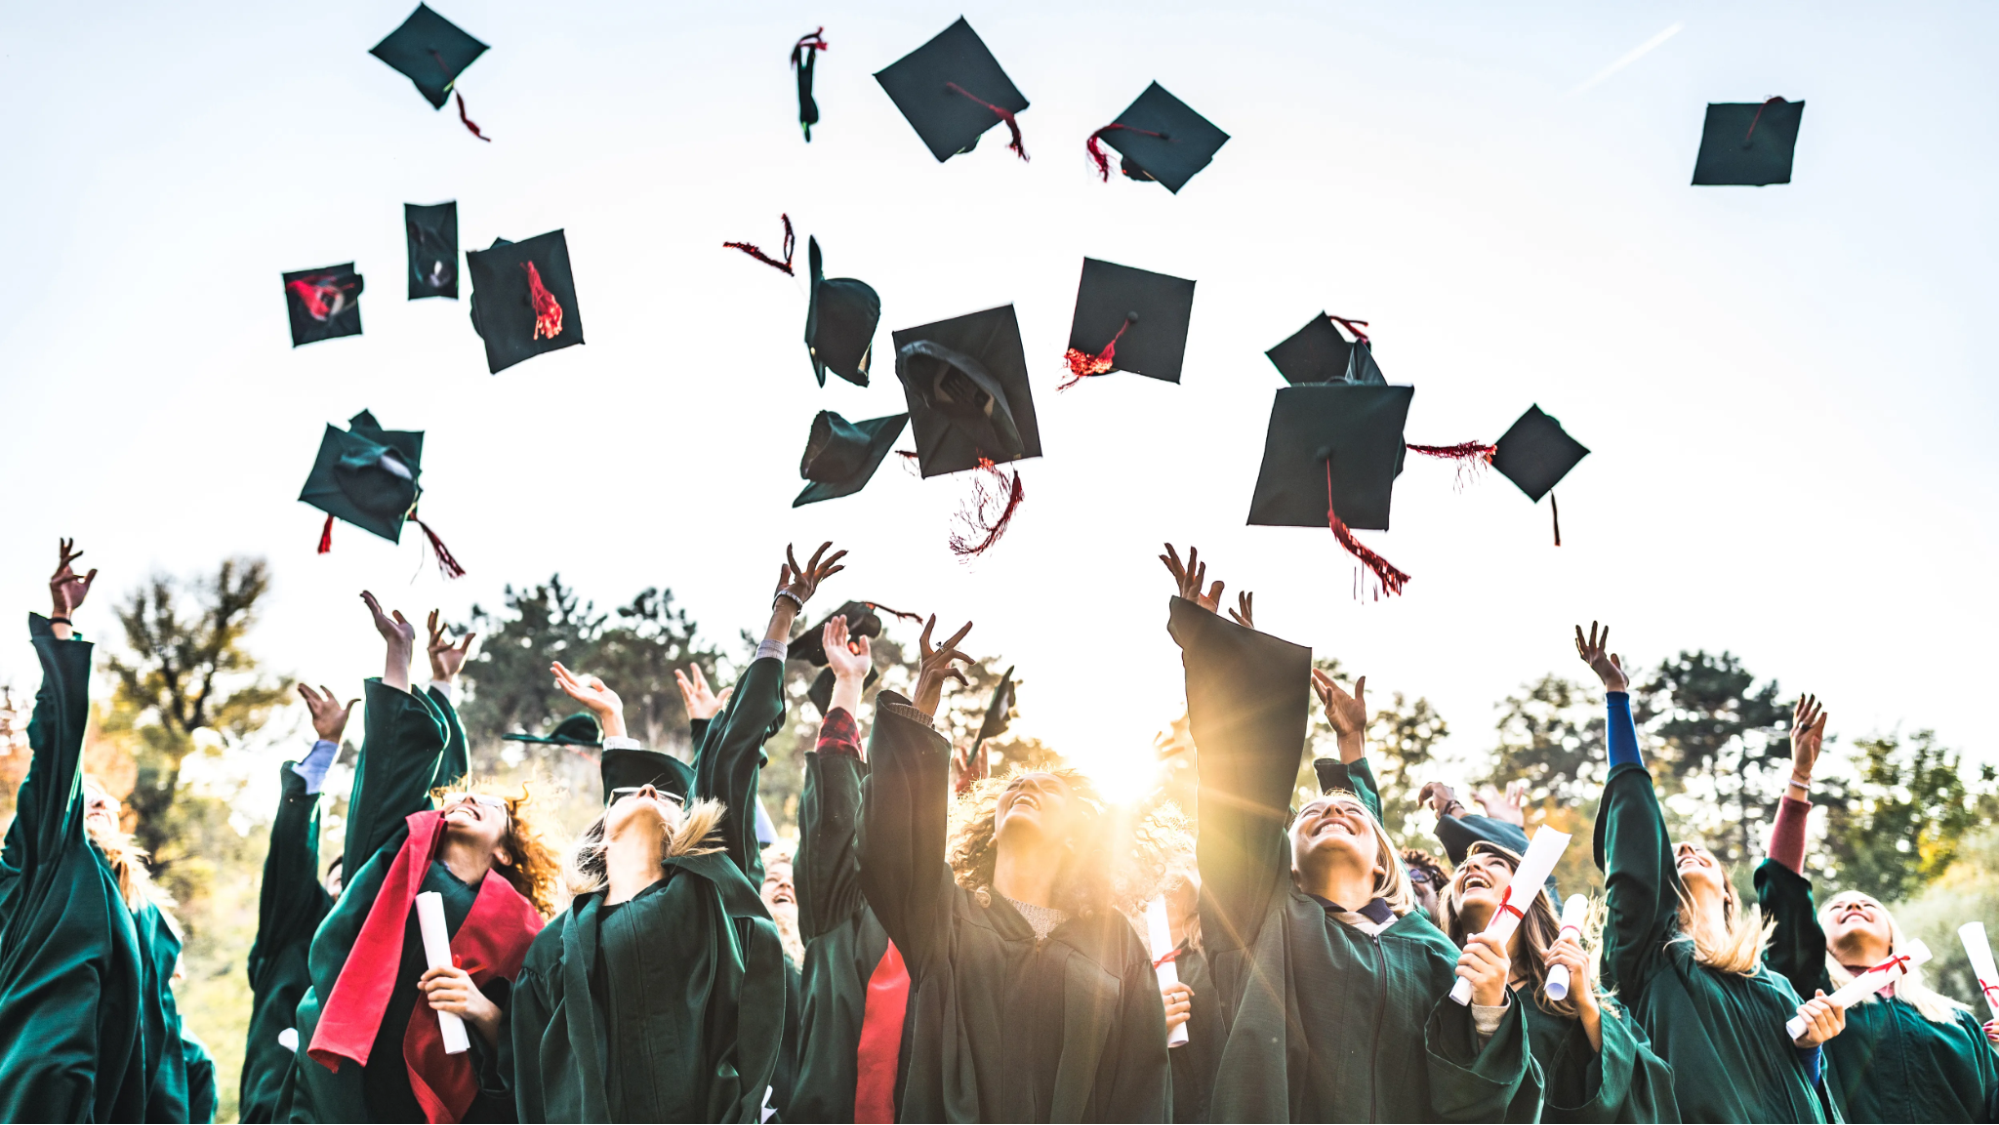 Just graduated high school? Learn "How To Build Momentum" for an unstoppable future. Your journey to success starts here!